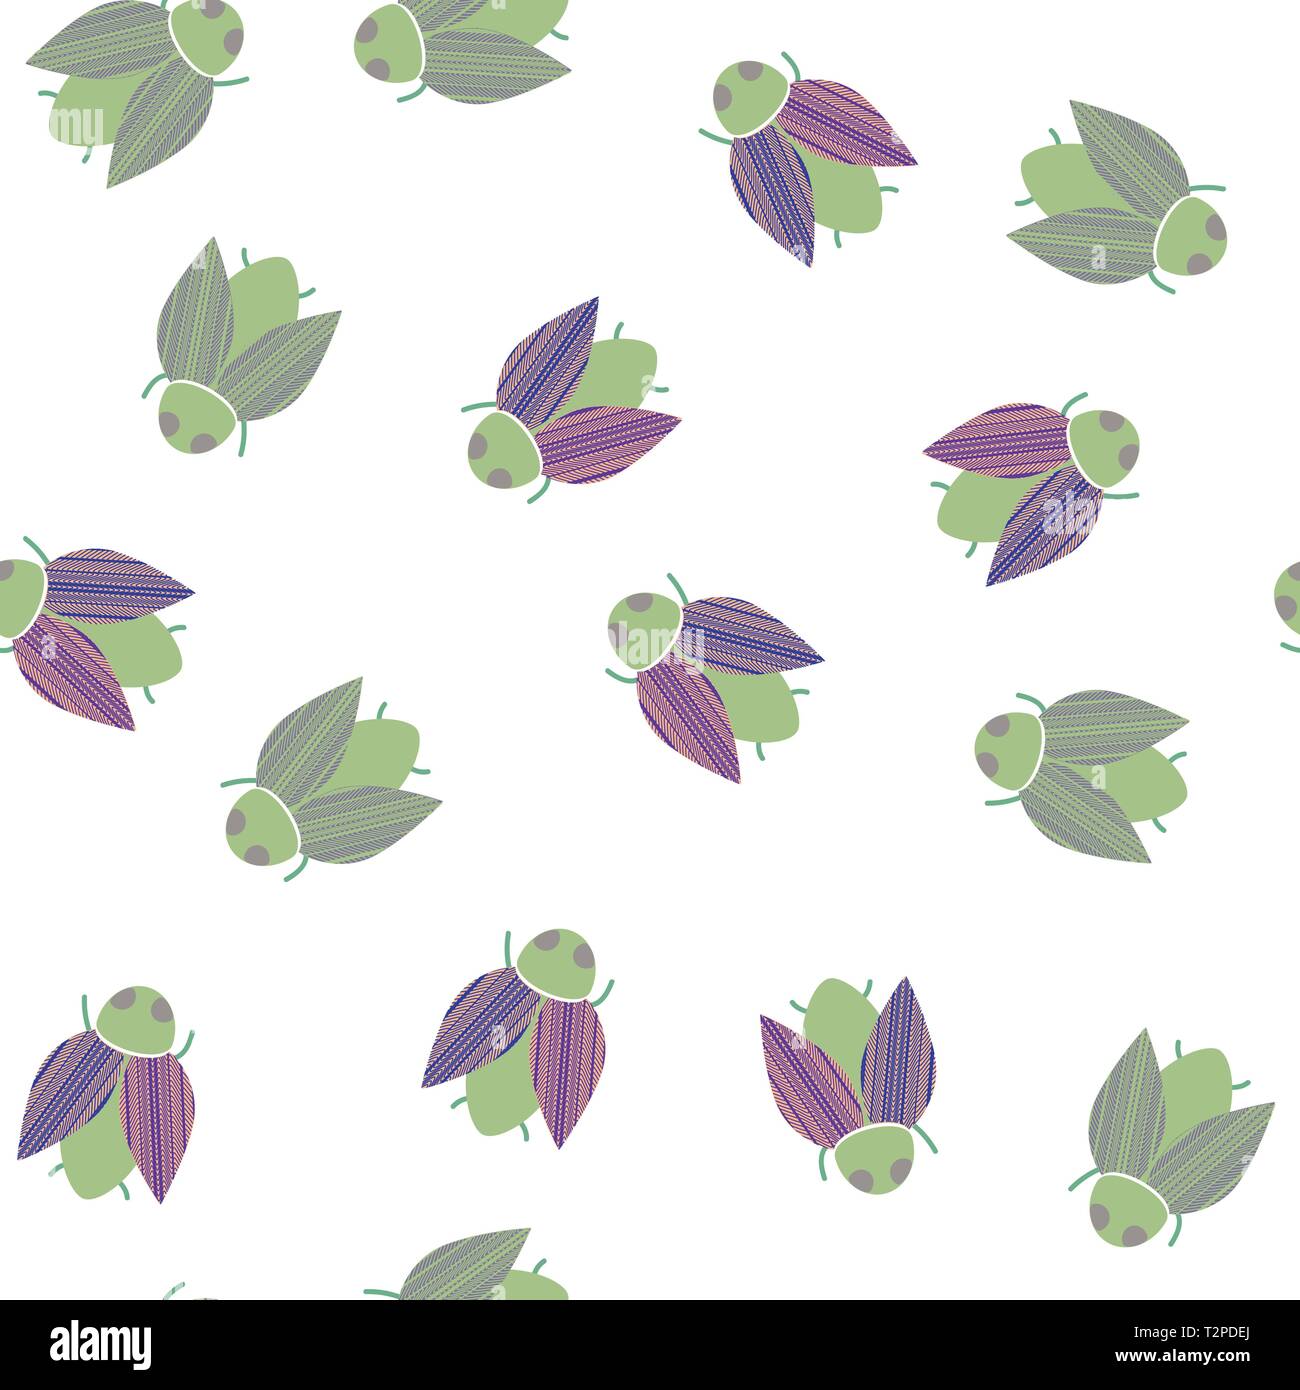 Seamless pattern with beetle on the white background. Insect illustration Stock Vector